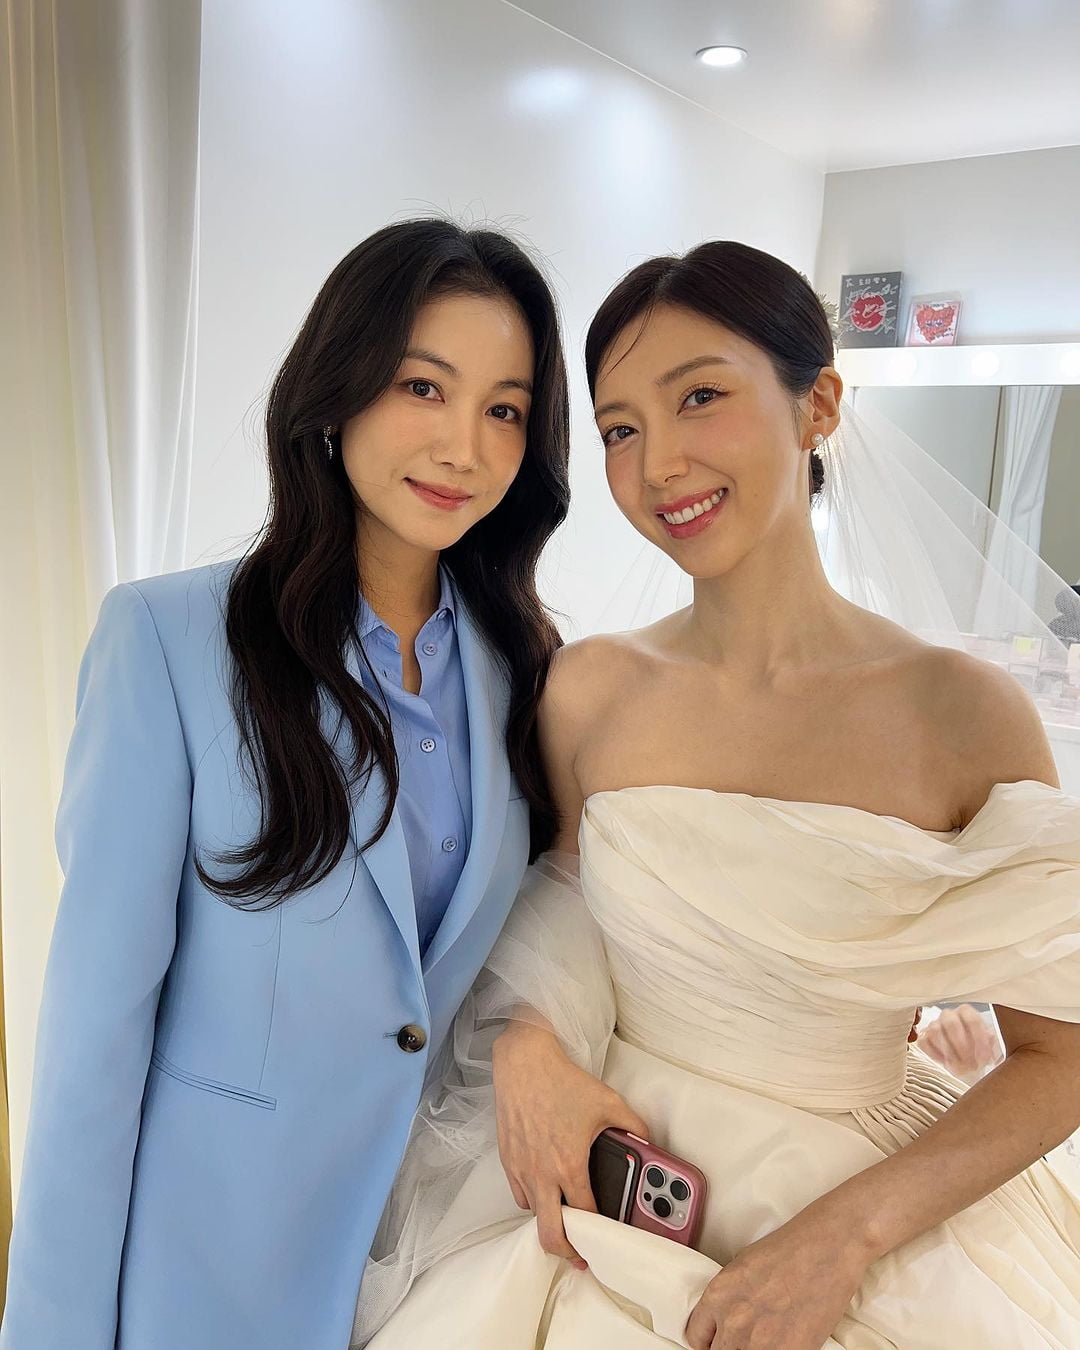 Kim Ok-bin and Chae Seo-jin, honey flows from their gazes towards each other... Wedding behind-the-scenes cuts revealed